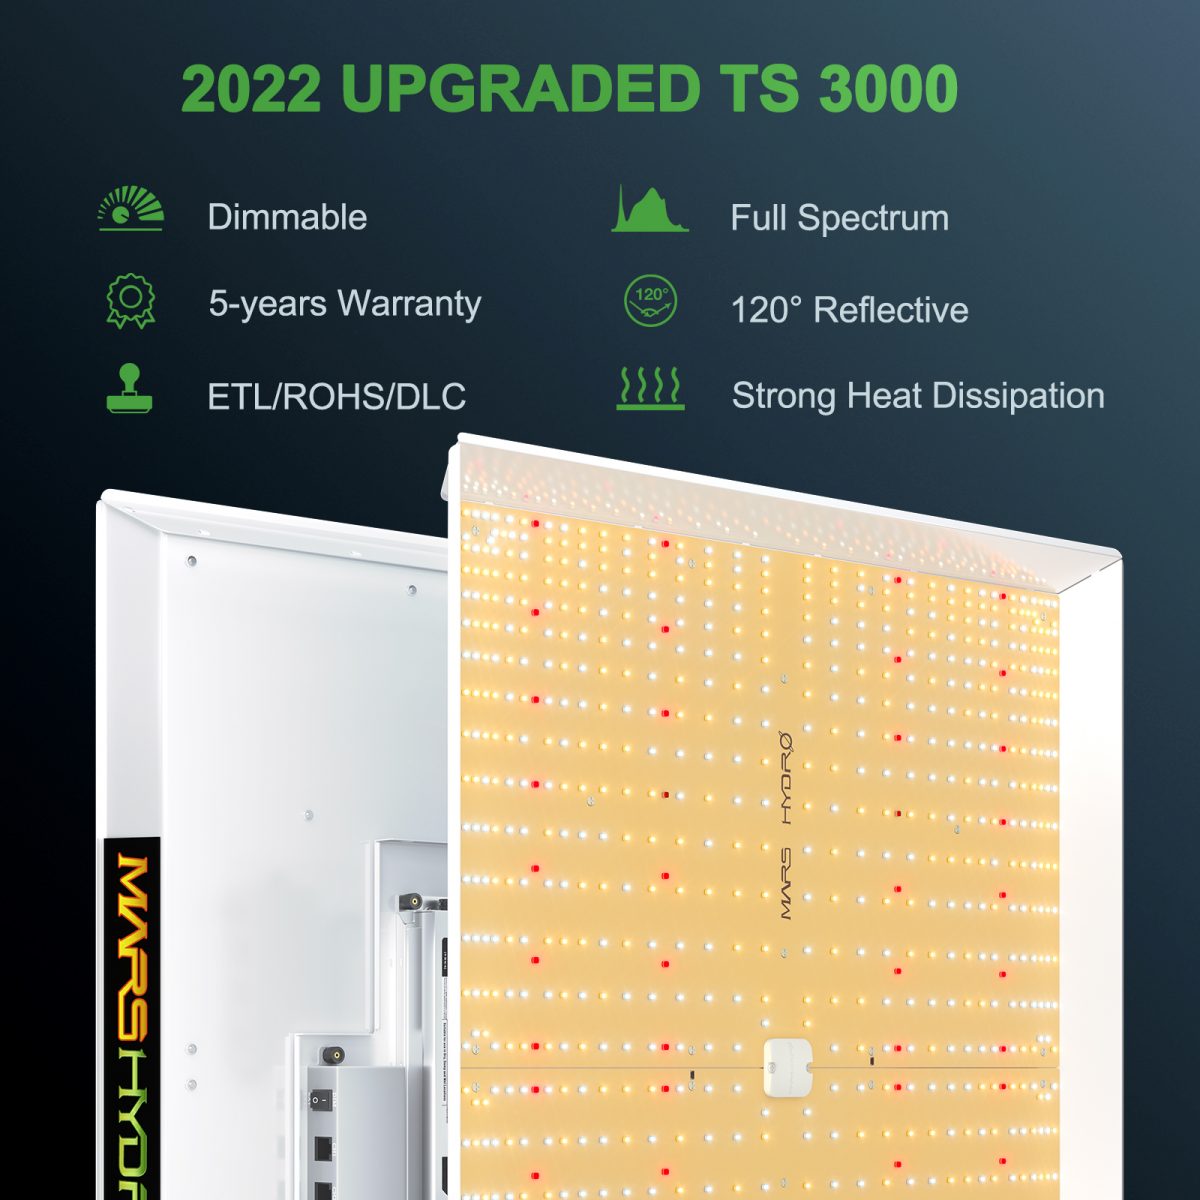 With 450w of power and 1016 chips, the Mars Hydro TS3000 can replace a 600w HPS light while saving 25% on electricity energy.